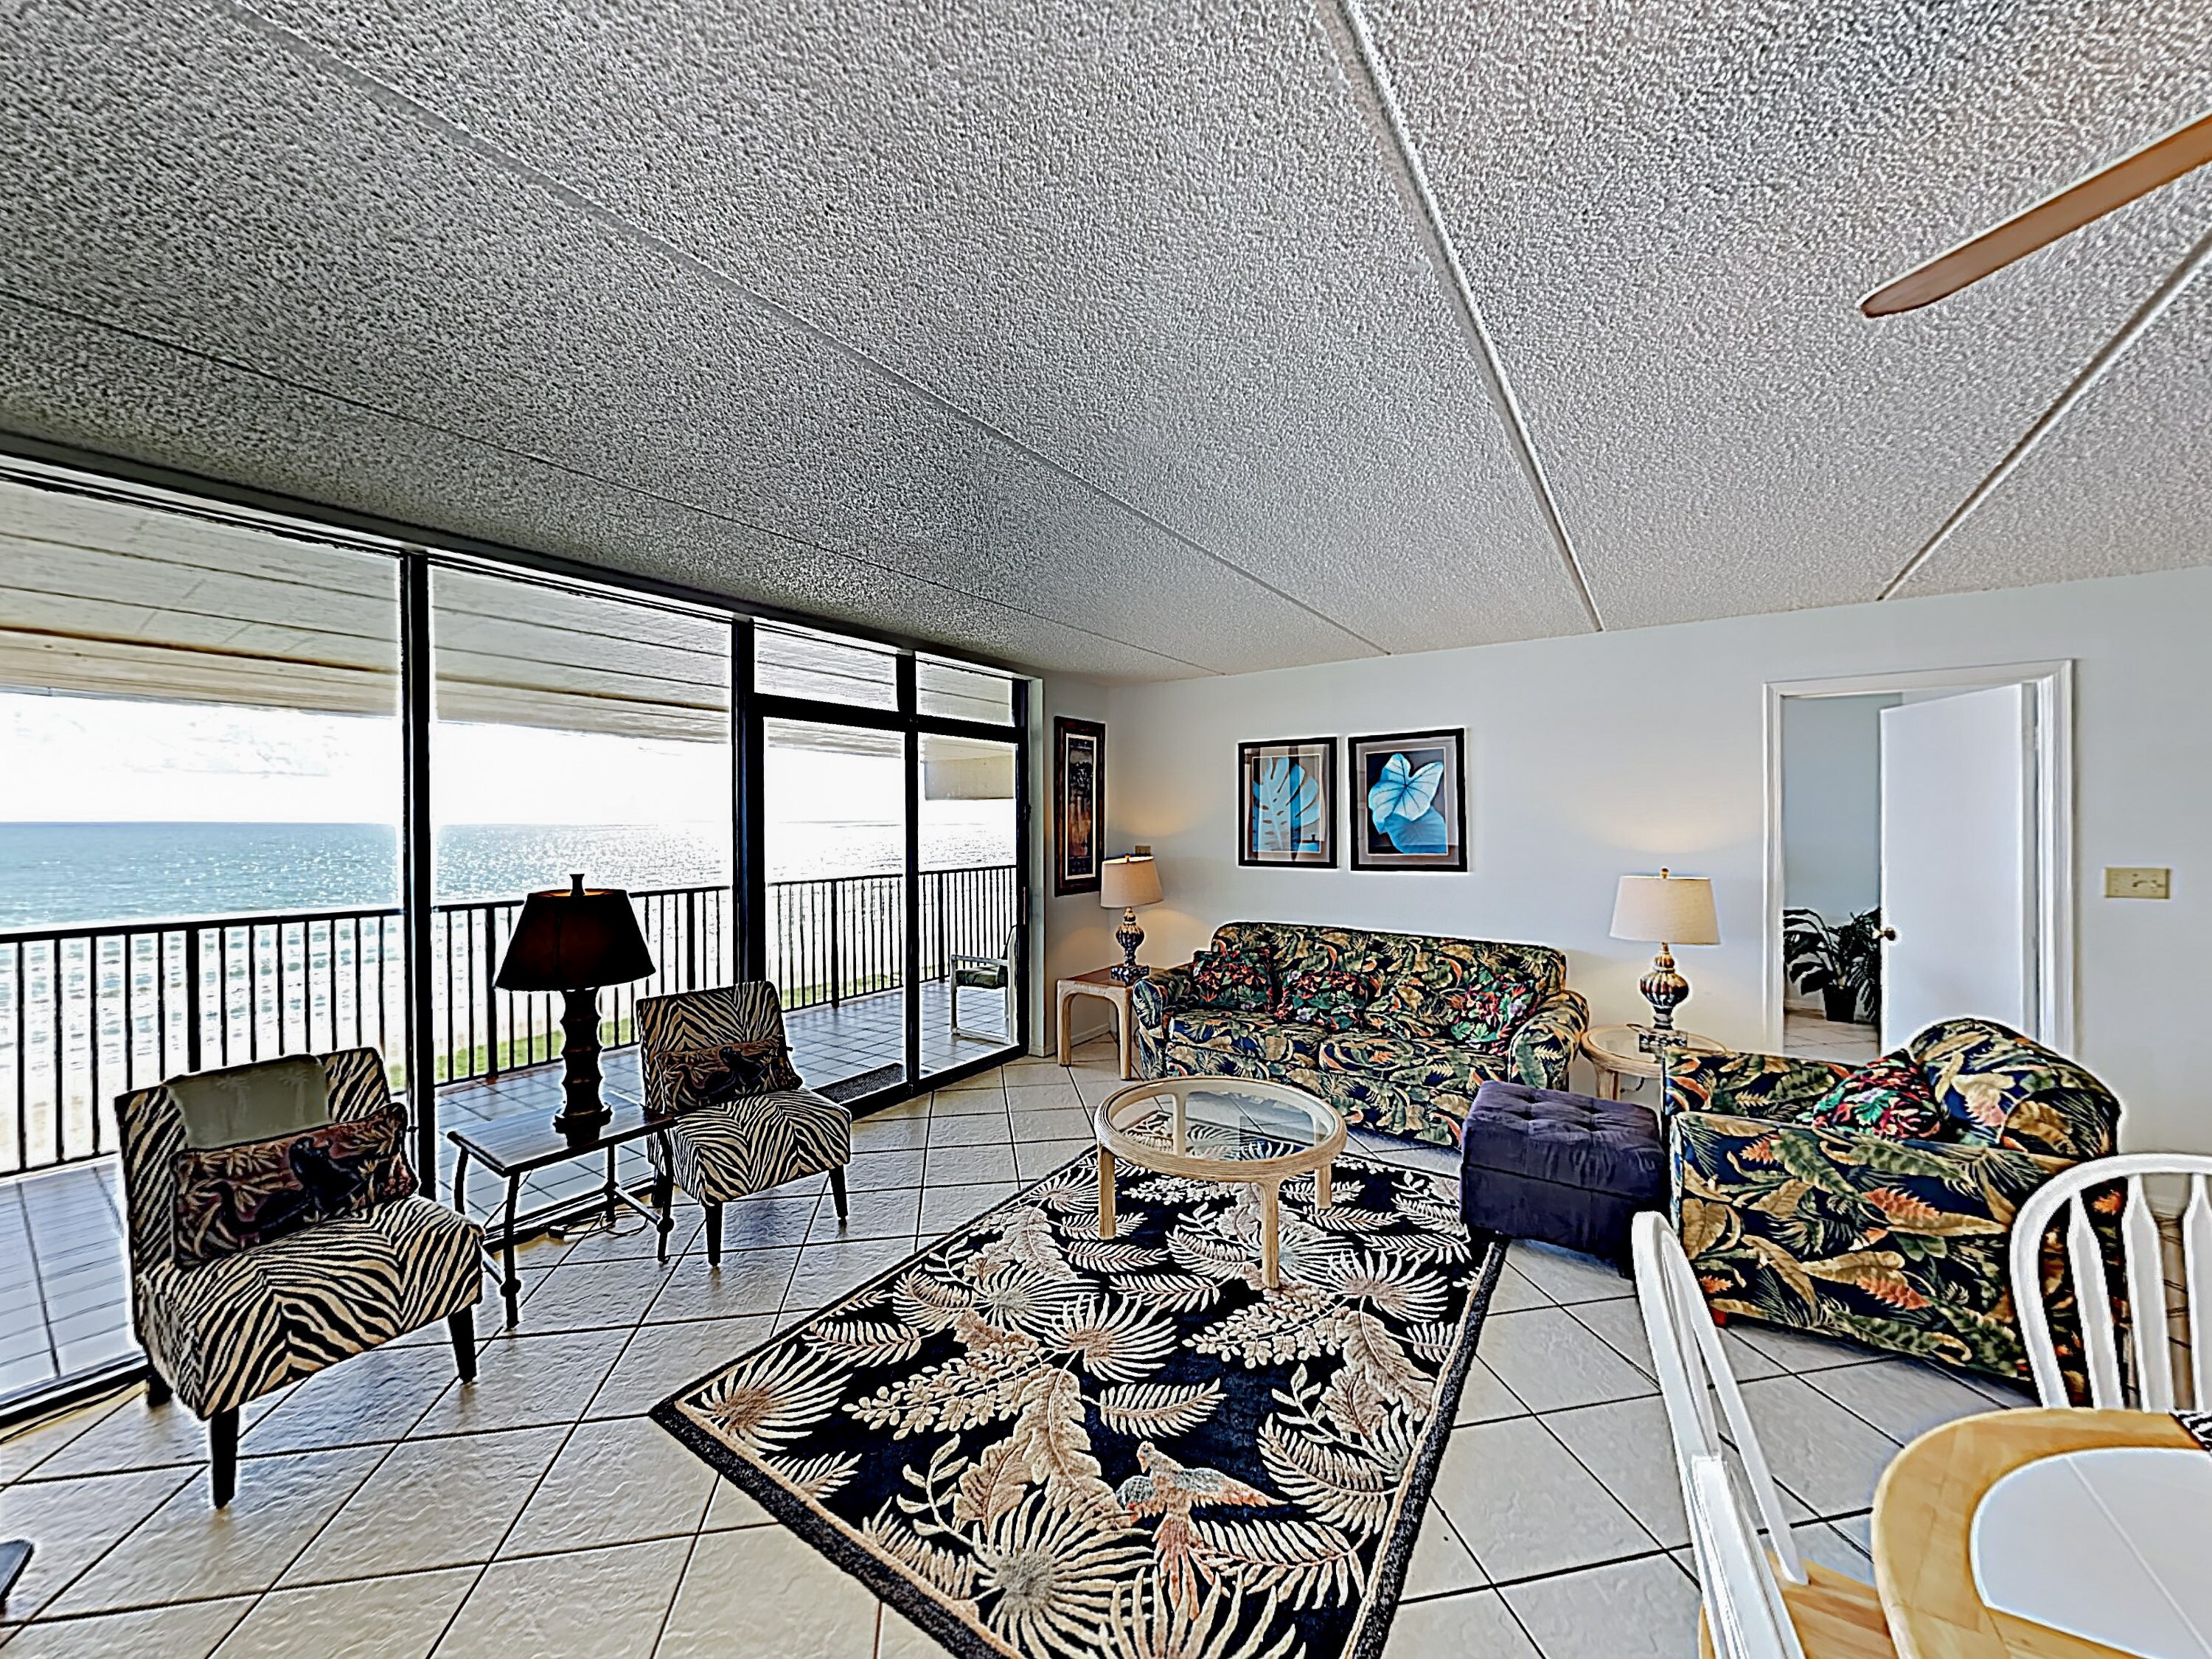 Welcome to Suntide III! This condo is professionally managed by TurnKey Vacation Rentals.